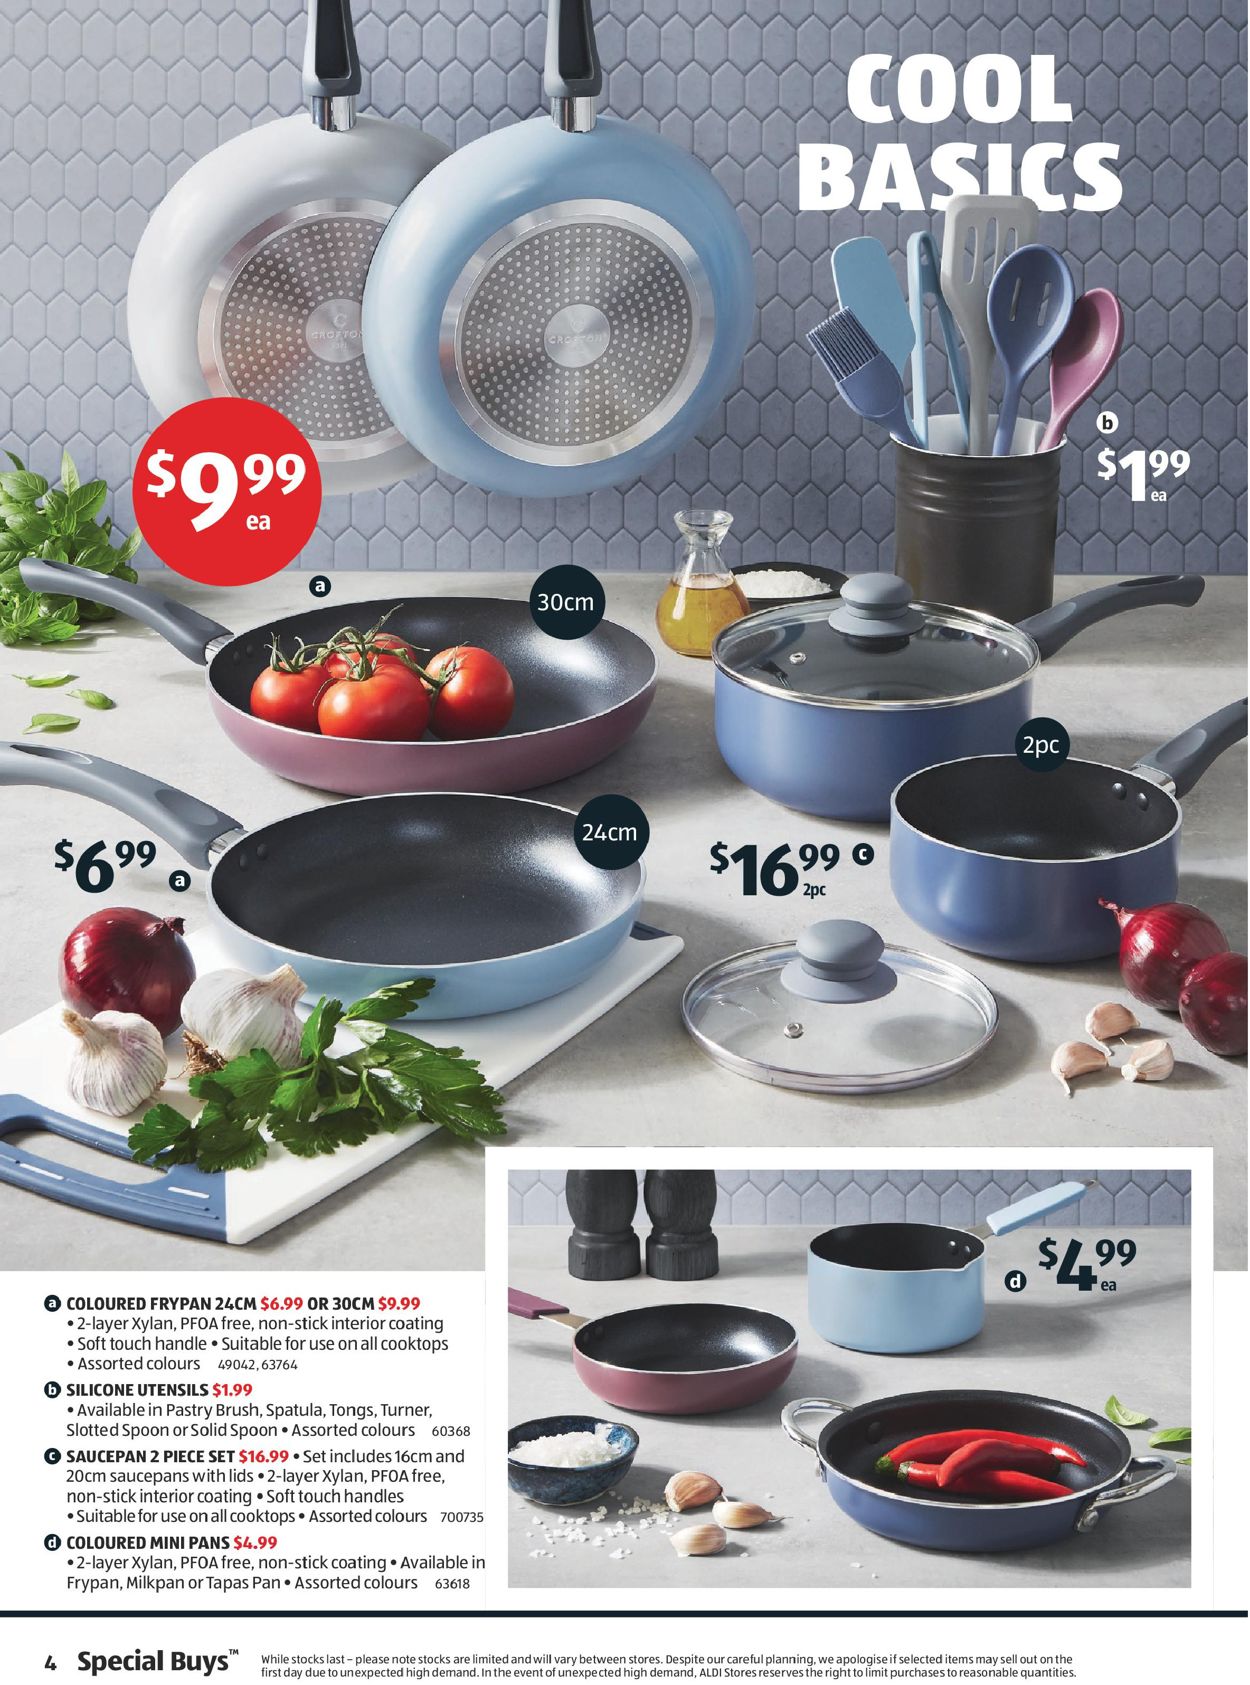 ALDI Catalogue from 07/04/2021